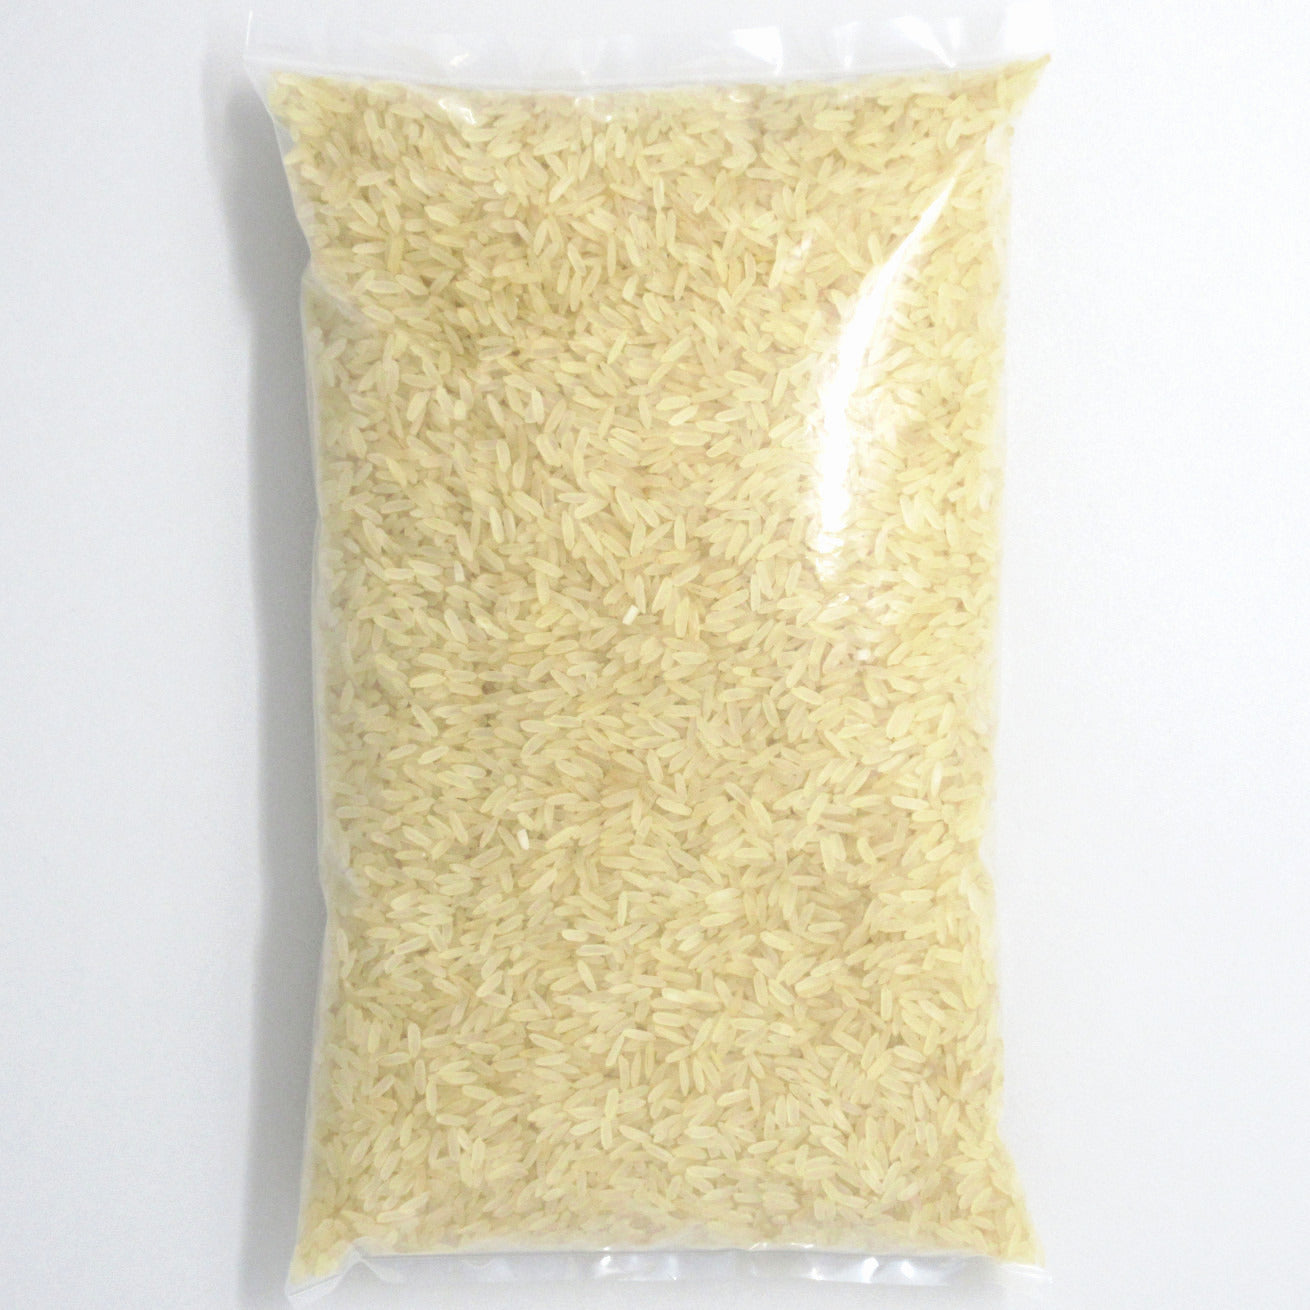 Flour Barrel product image - Parboiled Rice